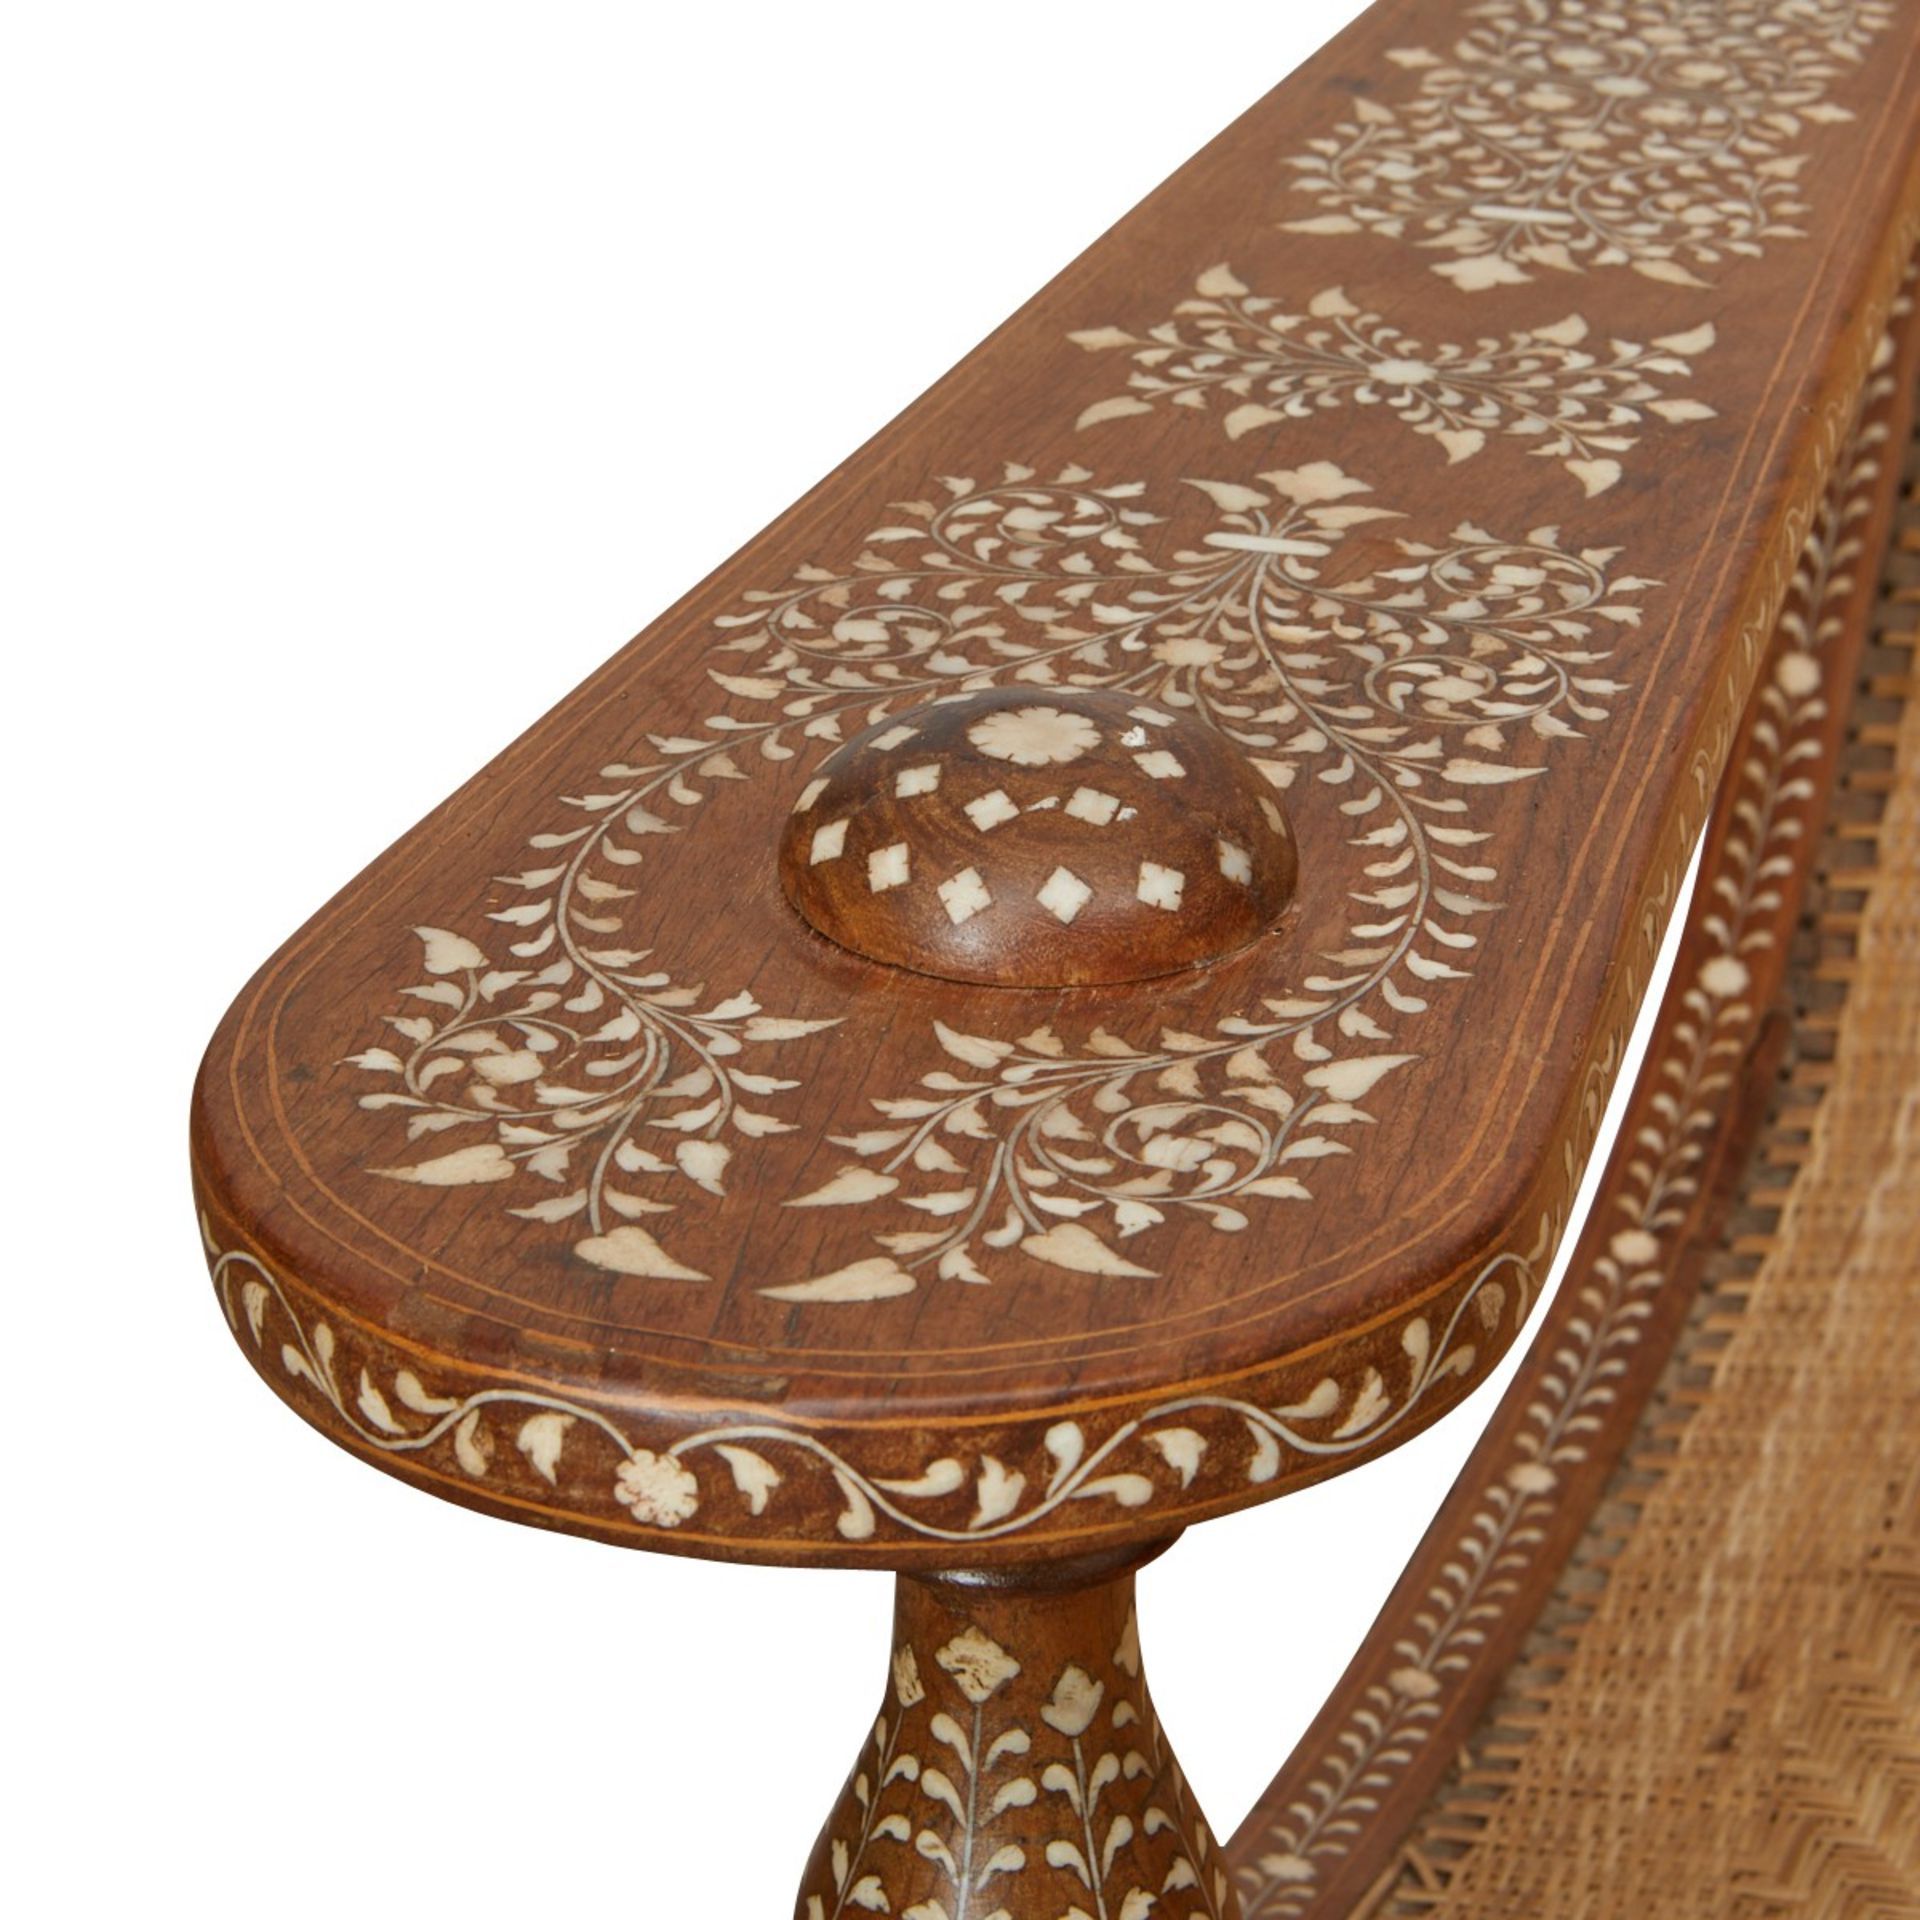 Syrian Inlaid Mother of Pearl Plantation Chair - Image 10 of 16